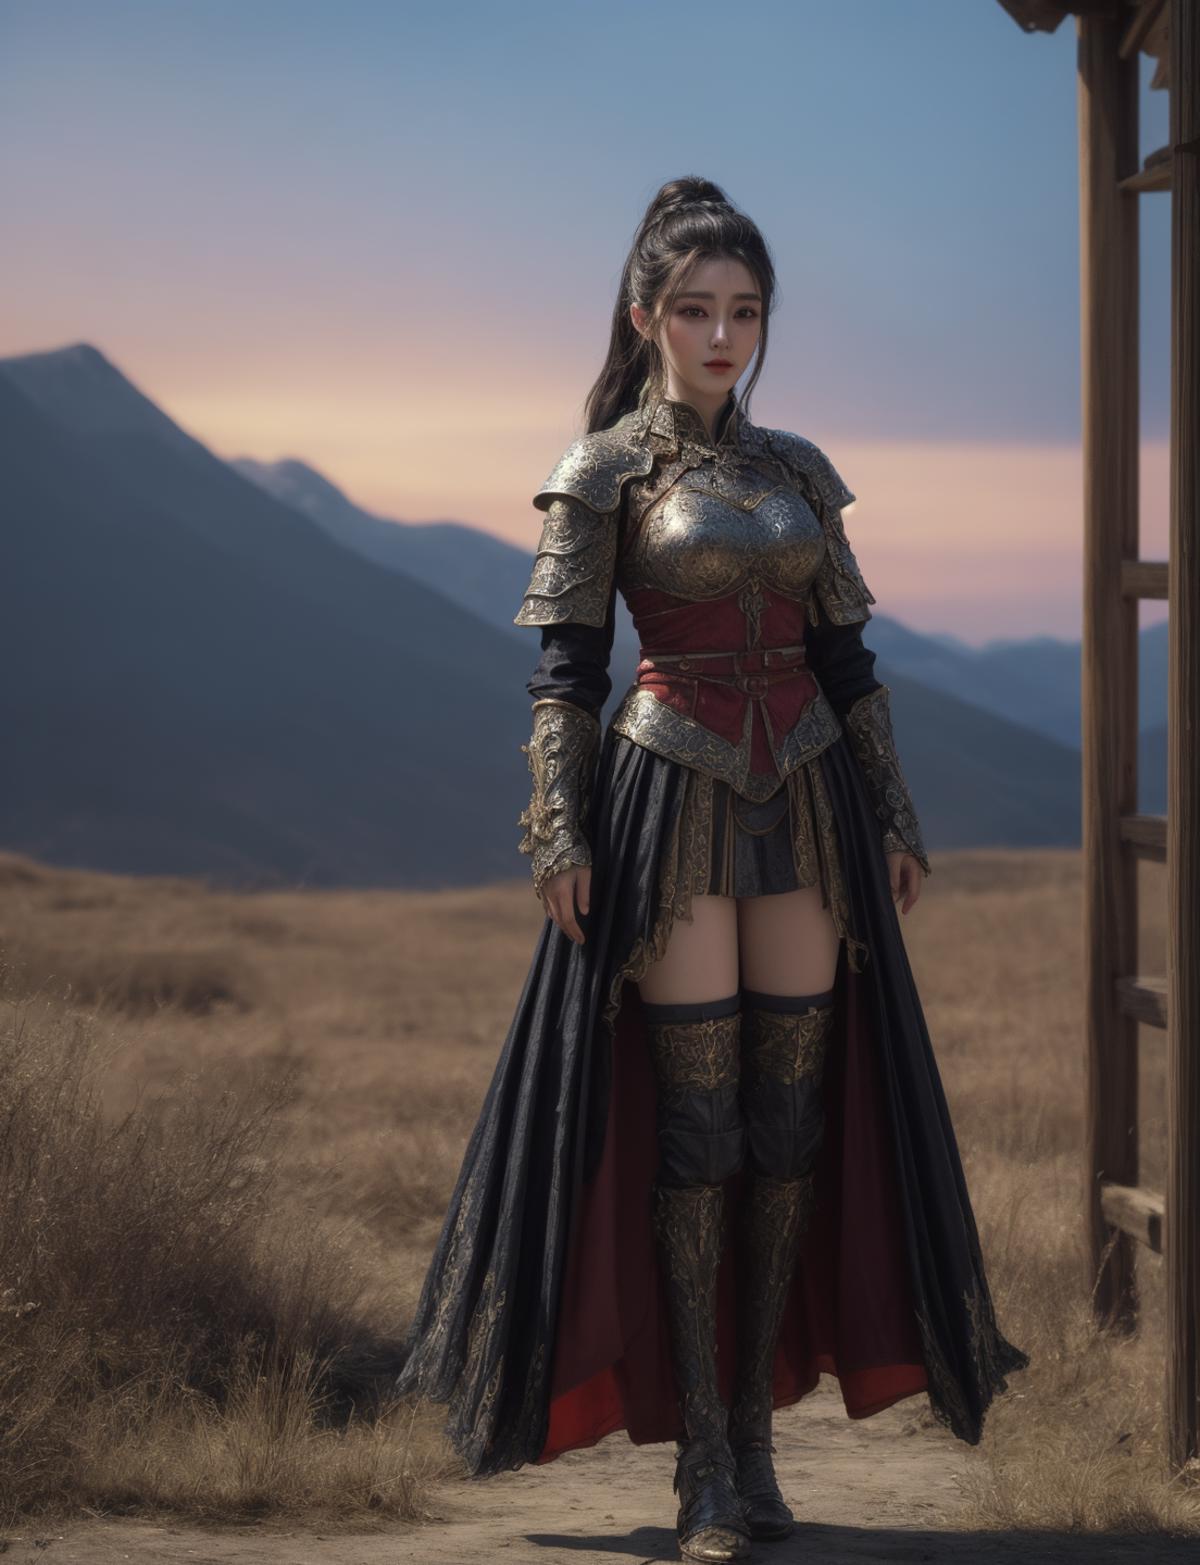 Artistic Eastern Fantasy Armor and Dress image by bluefish12